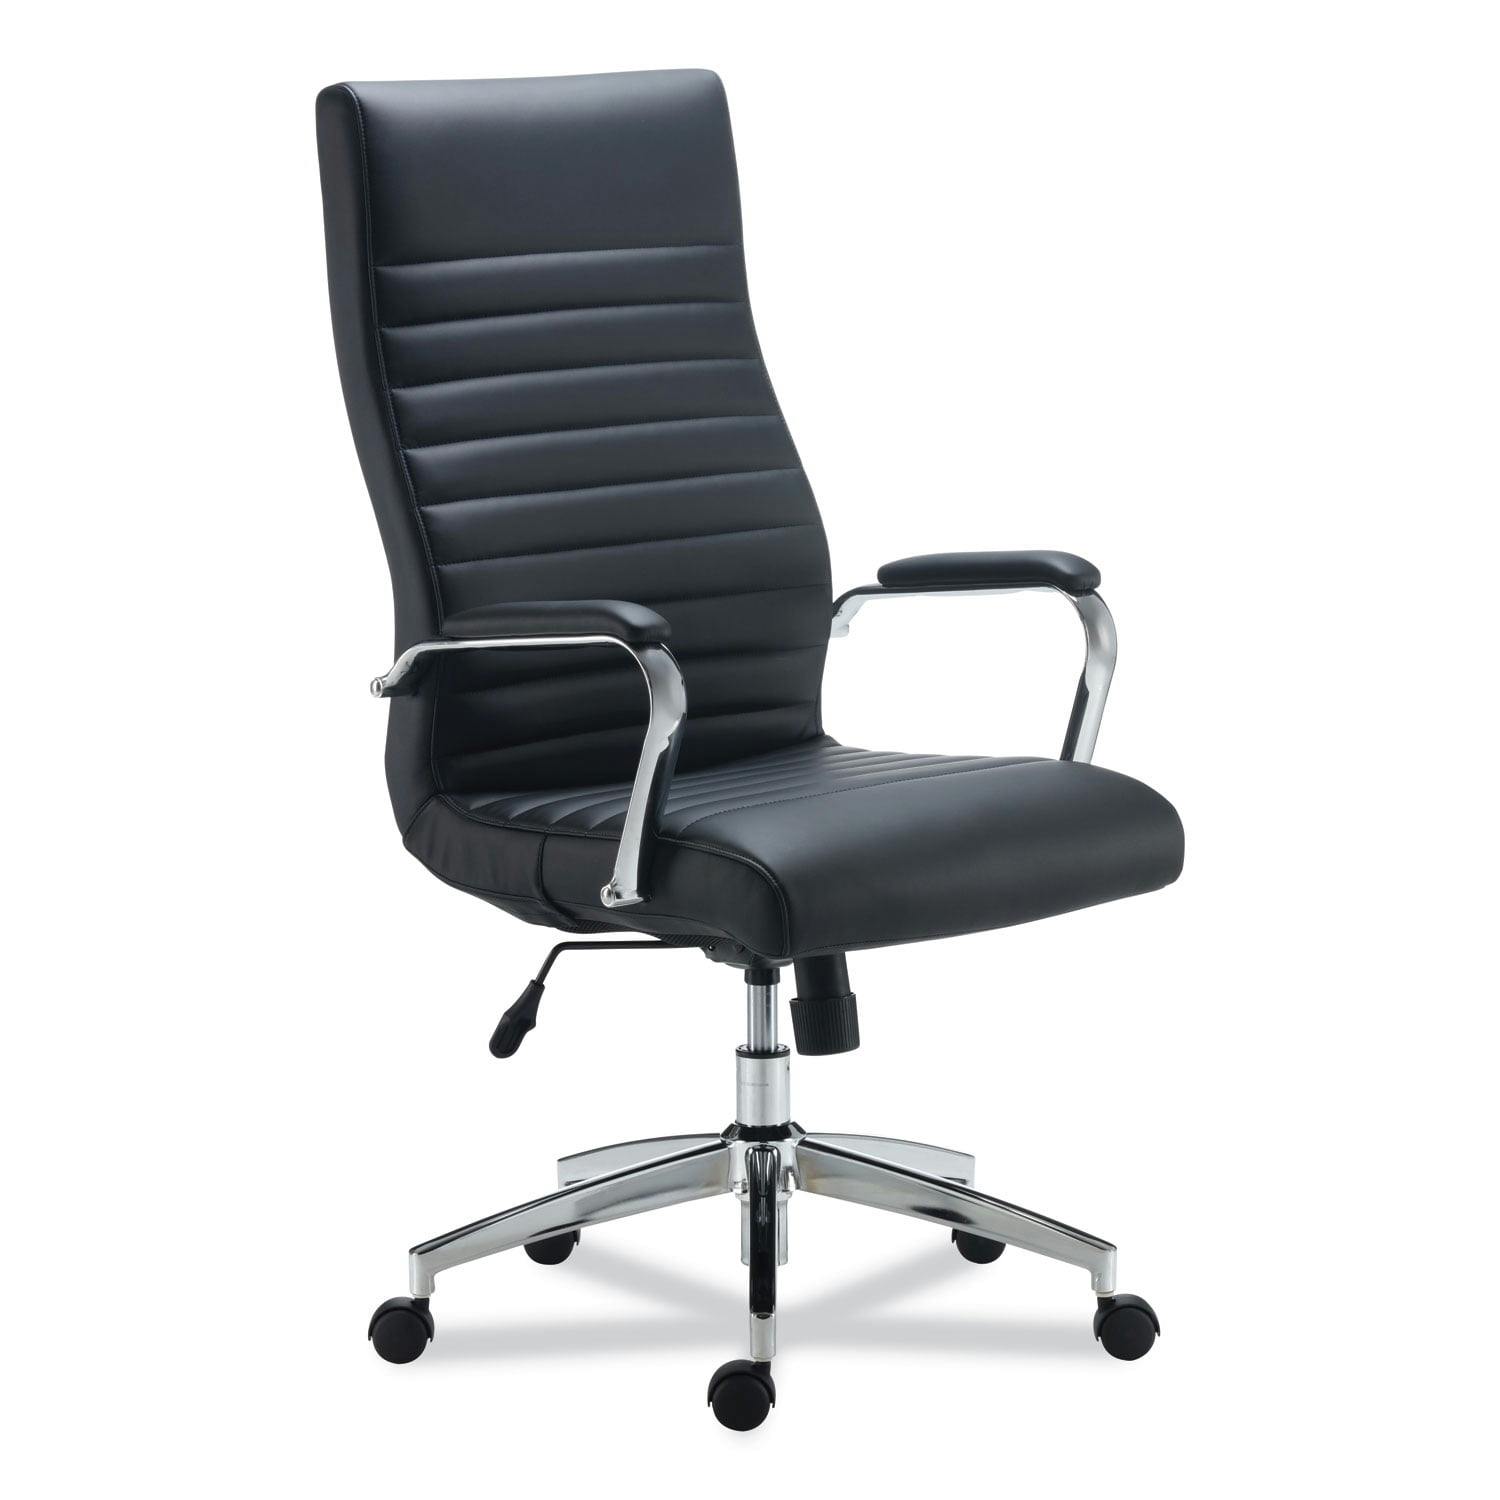 Luxurious High Back Black Leather Executive Swivel Chair with Chrome Base